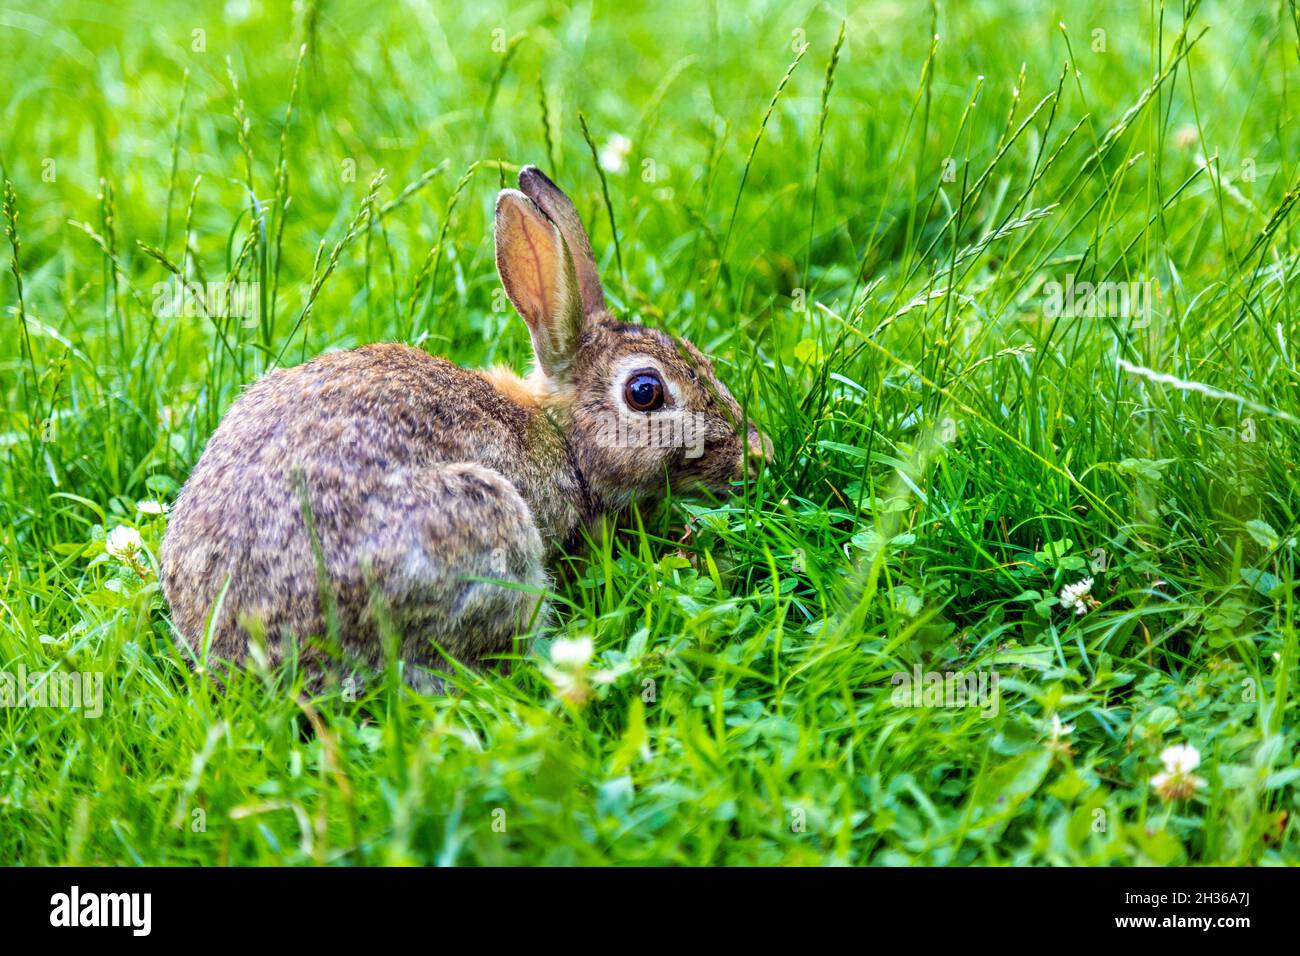 A rabbit in the Woodland Garden of Bushy Park, East Molesey, London, UK Stock Photo